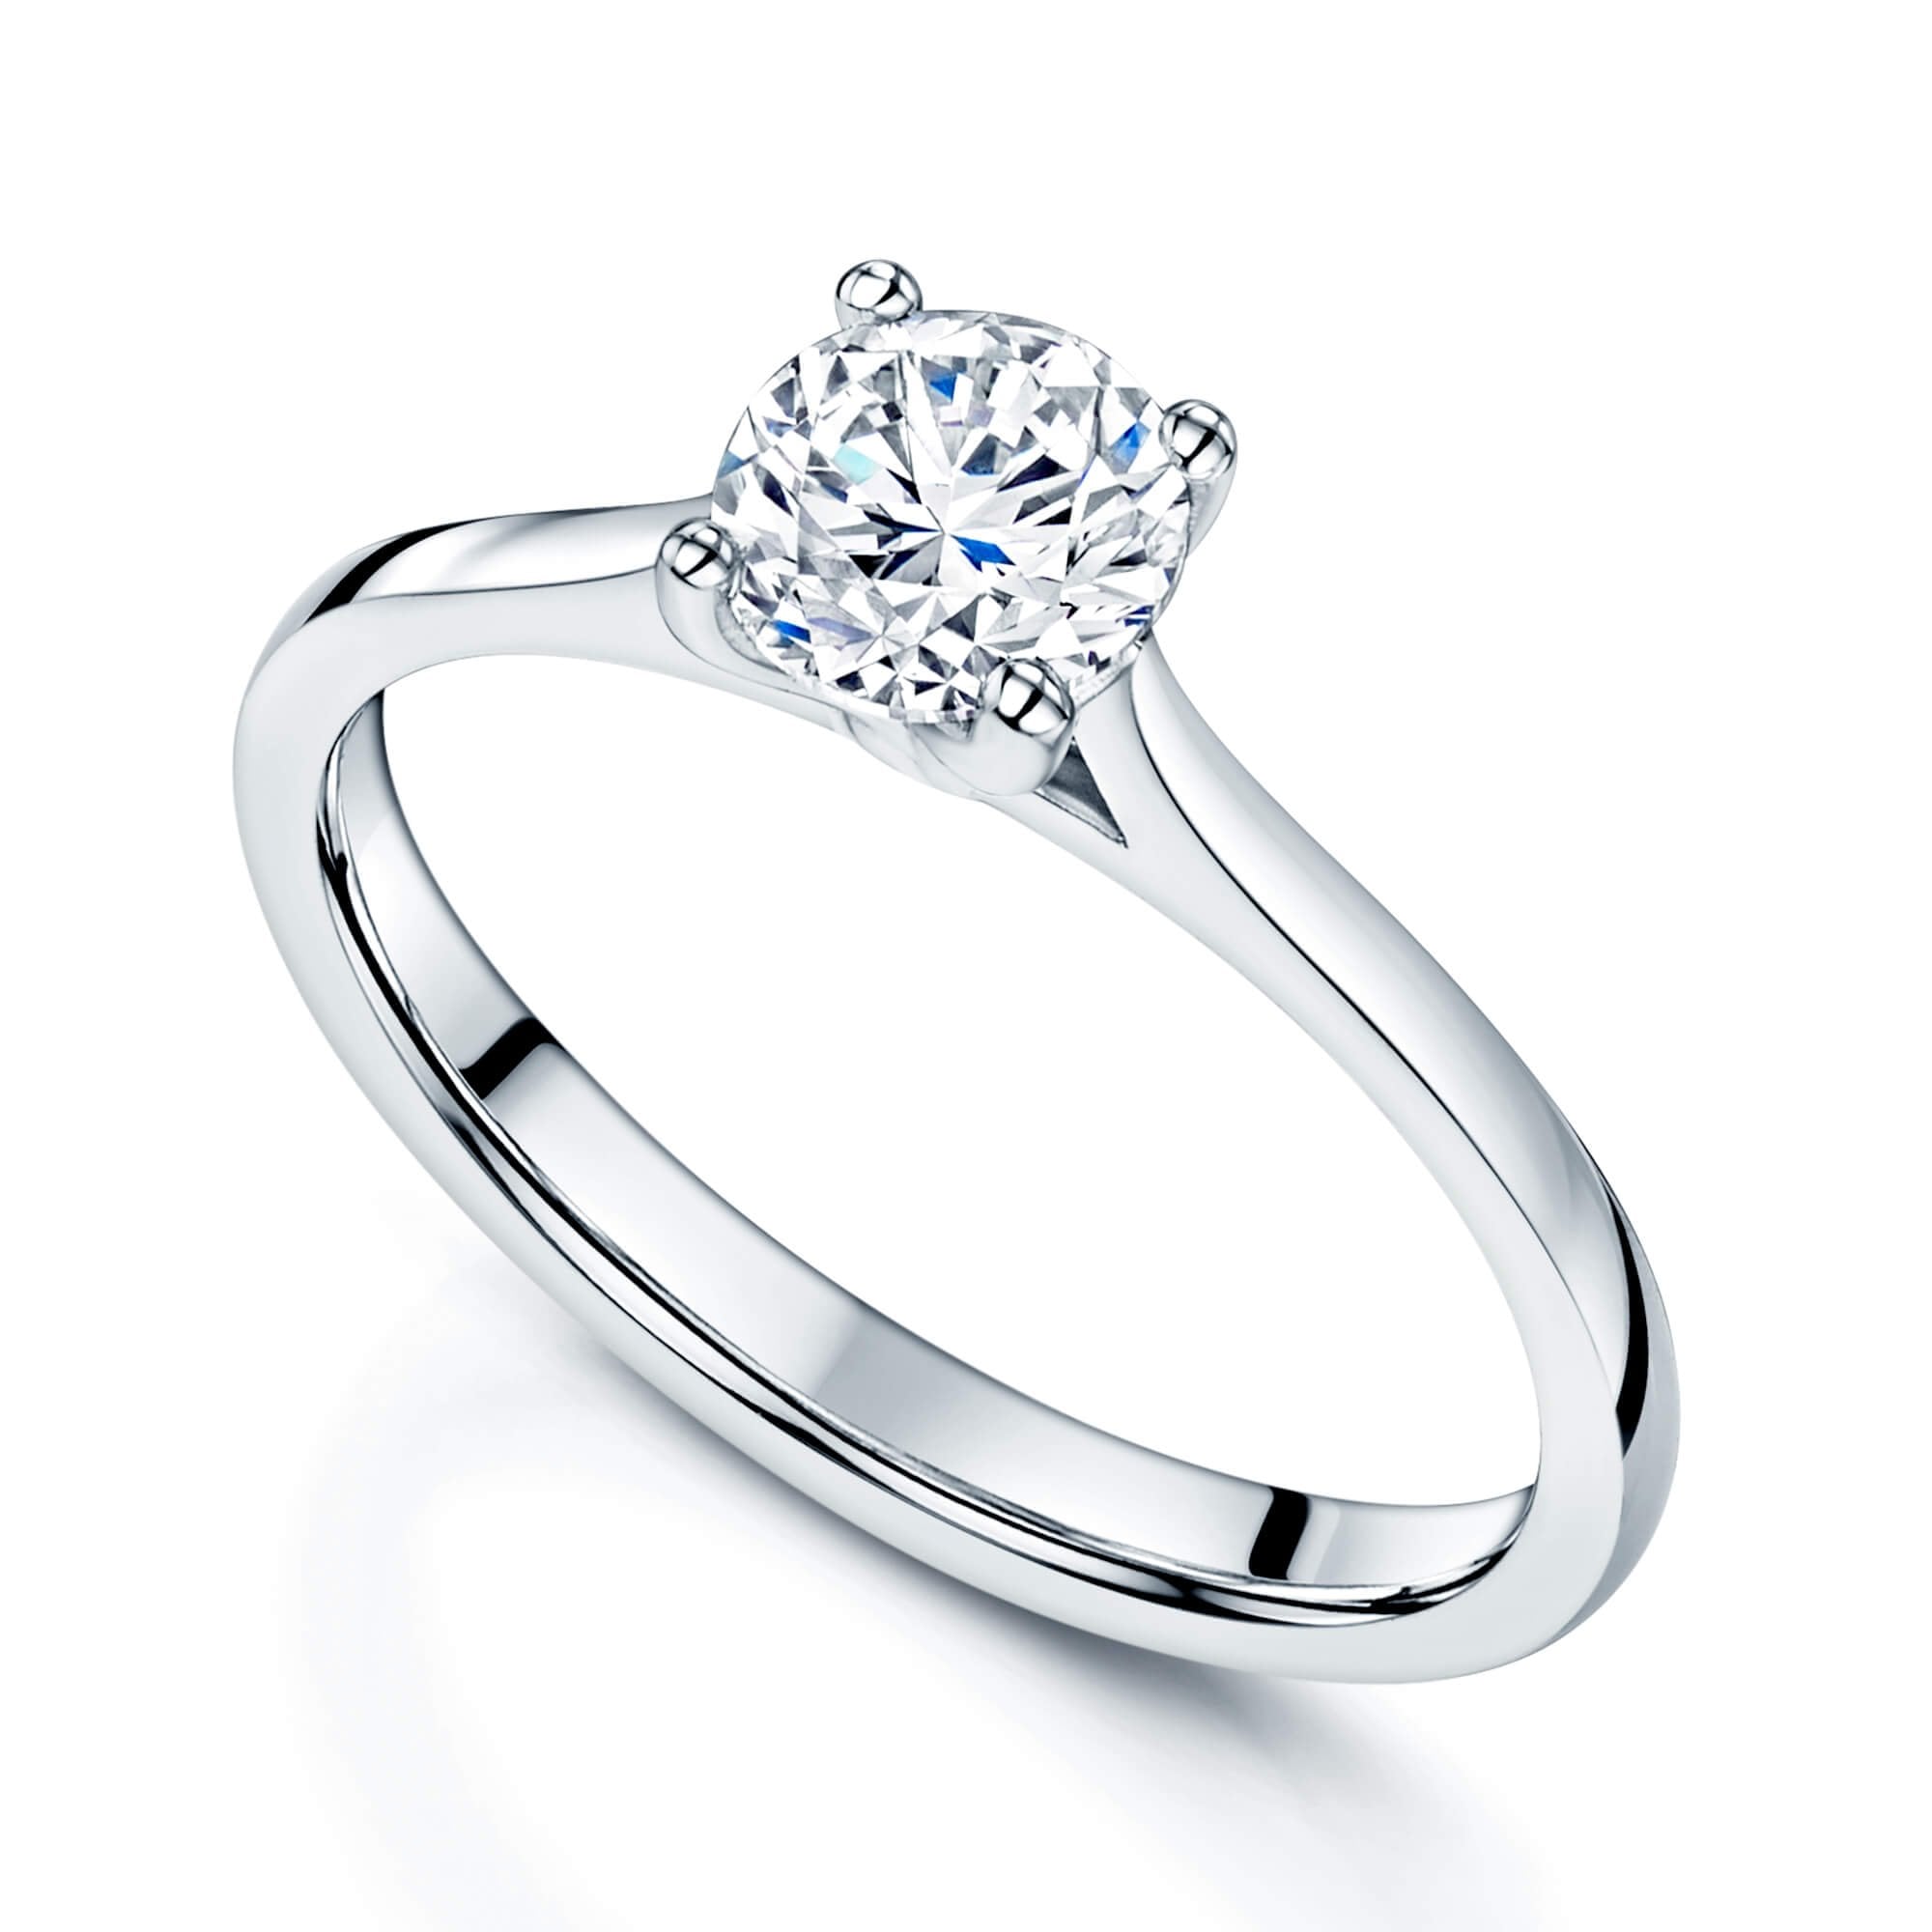 Simply Solitaire Collection Platinum Set Diamond Solitaire Engagement Ring GIA Certified 0.70 Carat